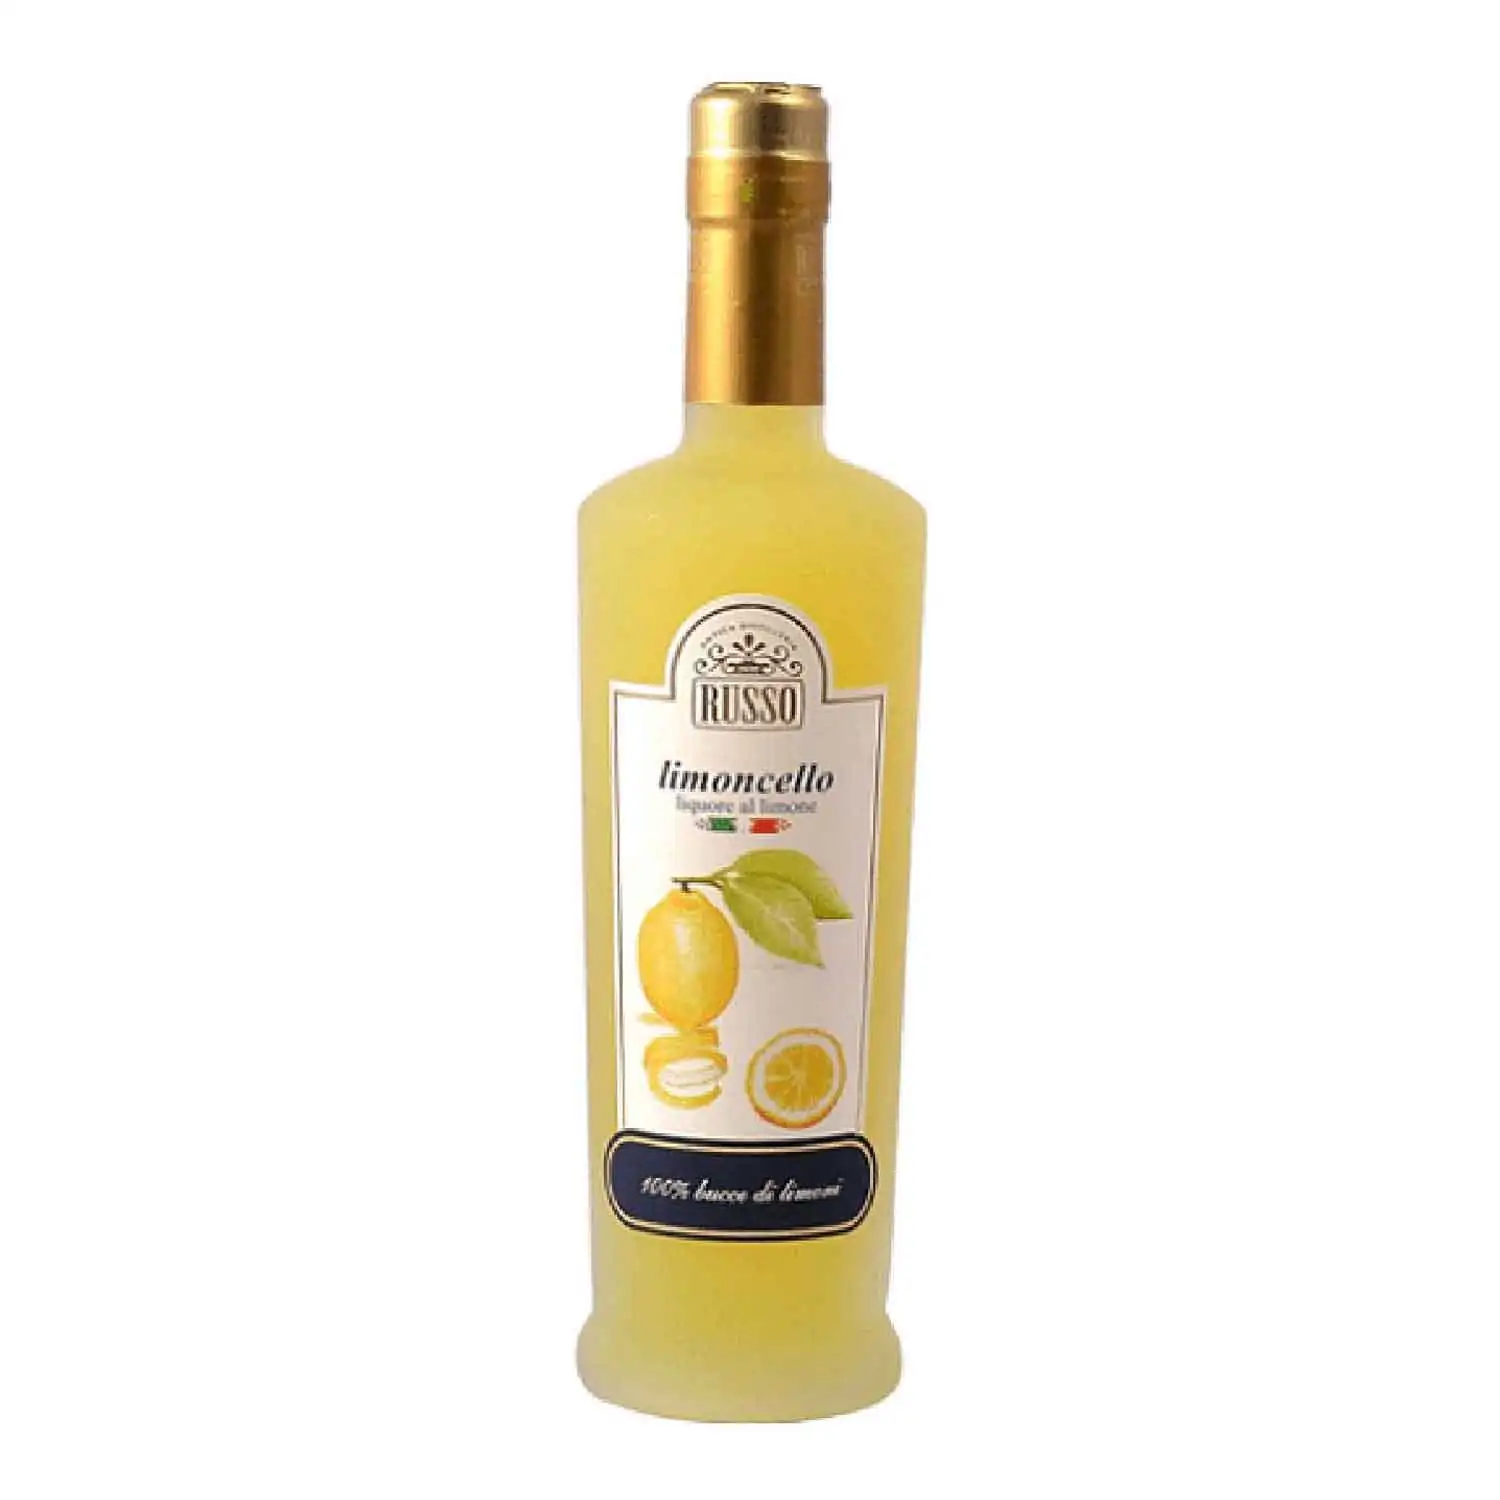 Russo limoncello 70cl Alc 32% - Buy at Real Tobacco